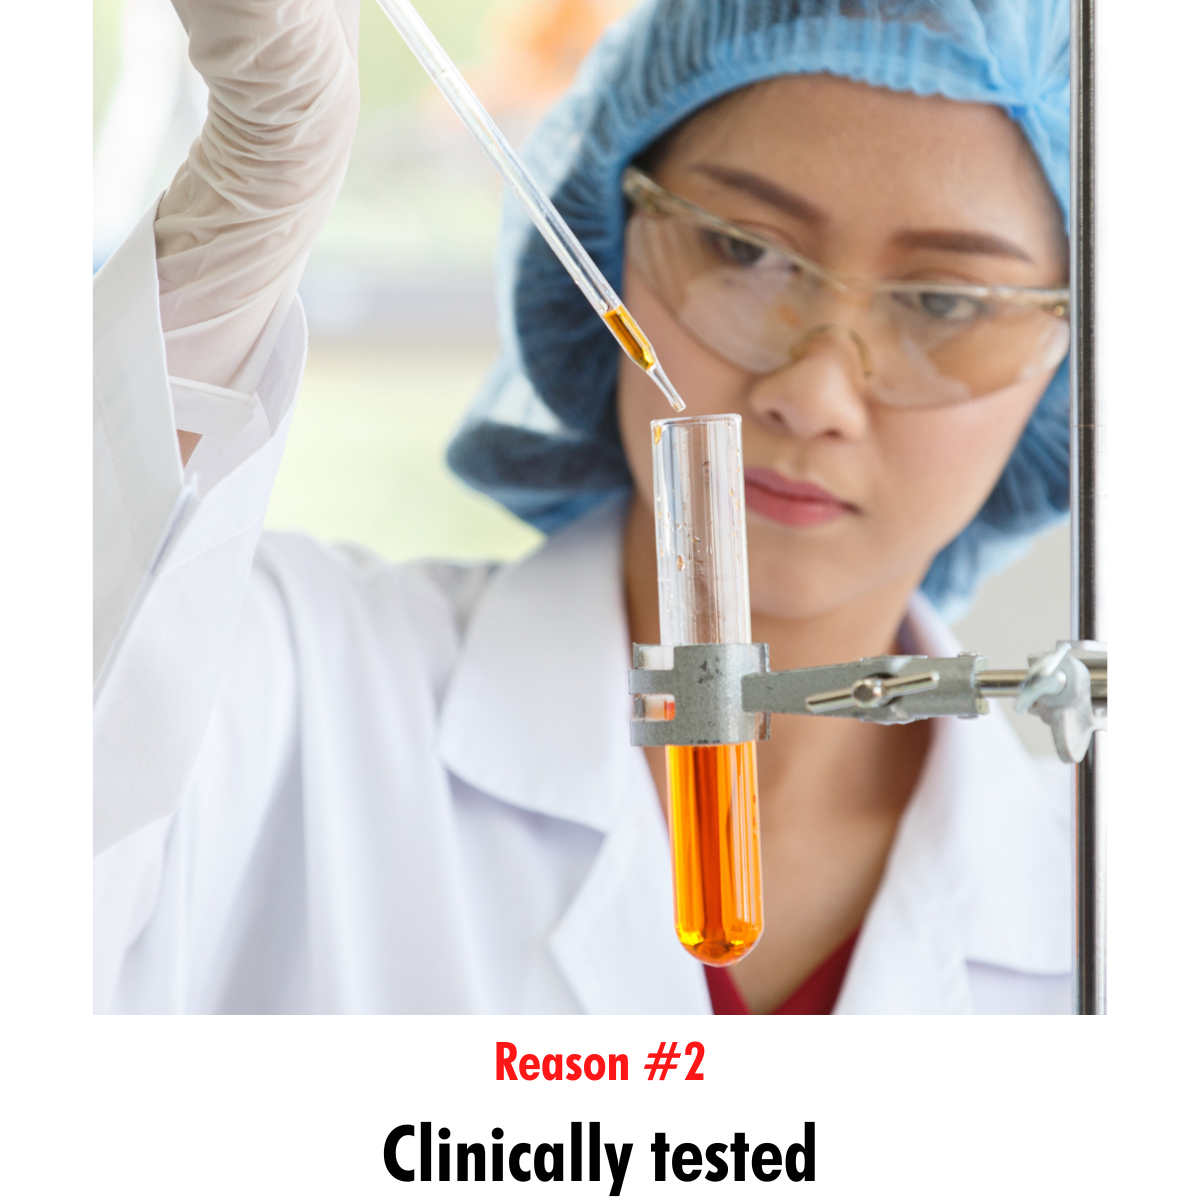 Scientist adding liquid to a test tube in a lab setting, illustrating Reason 2 for selecting Mirai Clinical products: their rigorous and thorough clinical testing